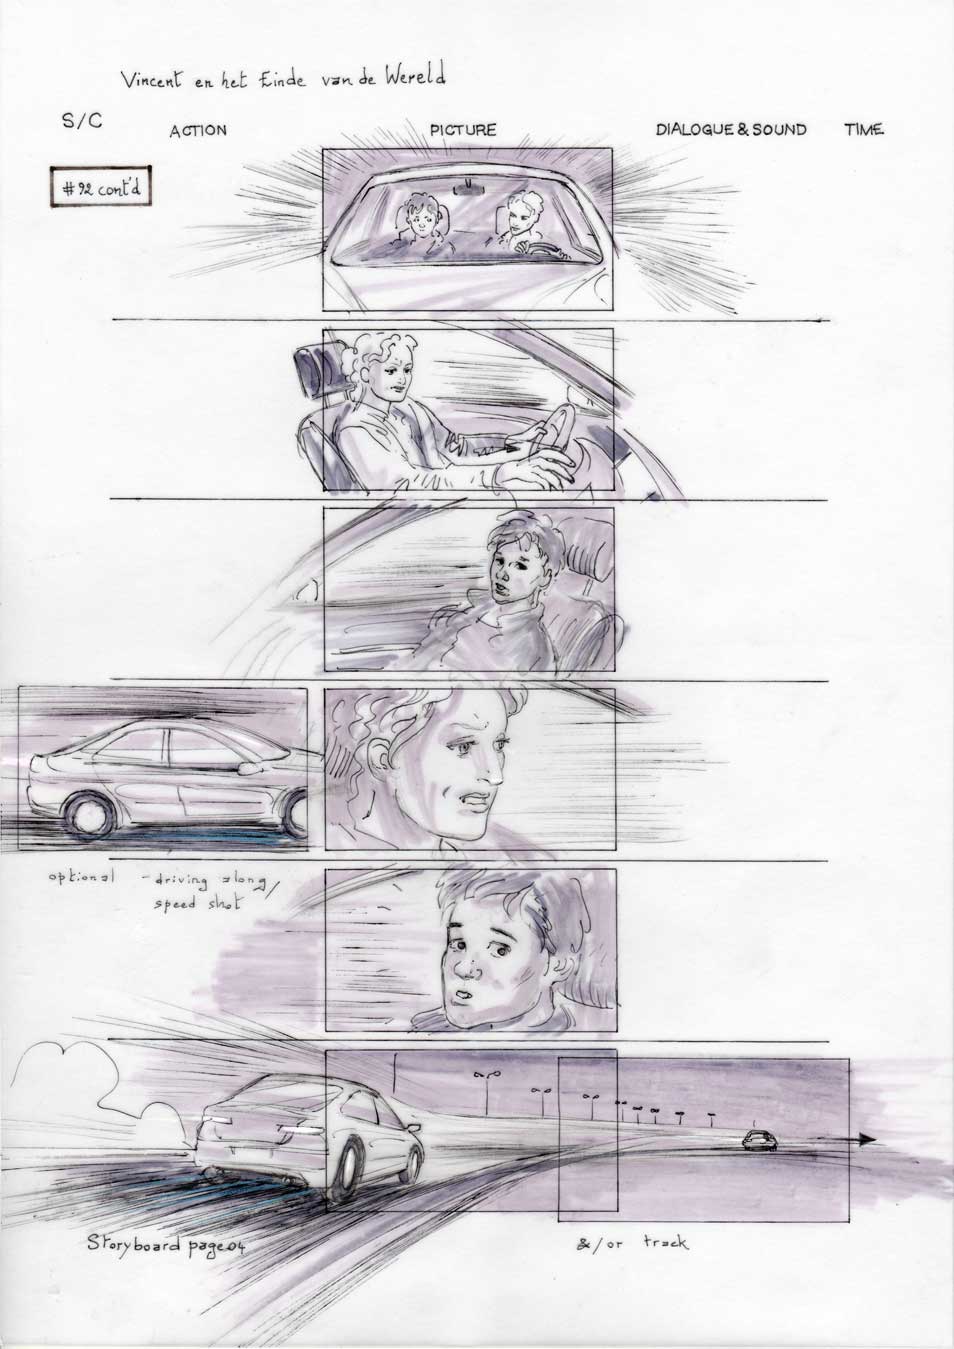 Vincent and the End of the World storyboard 04